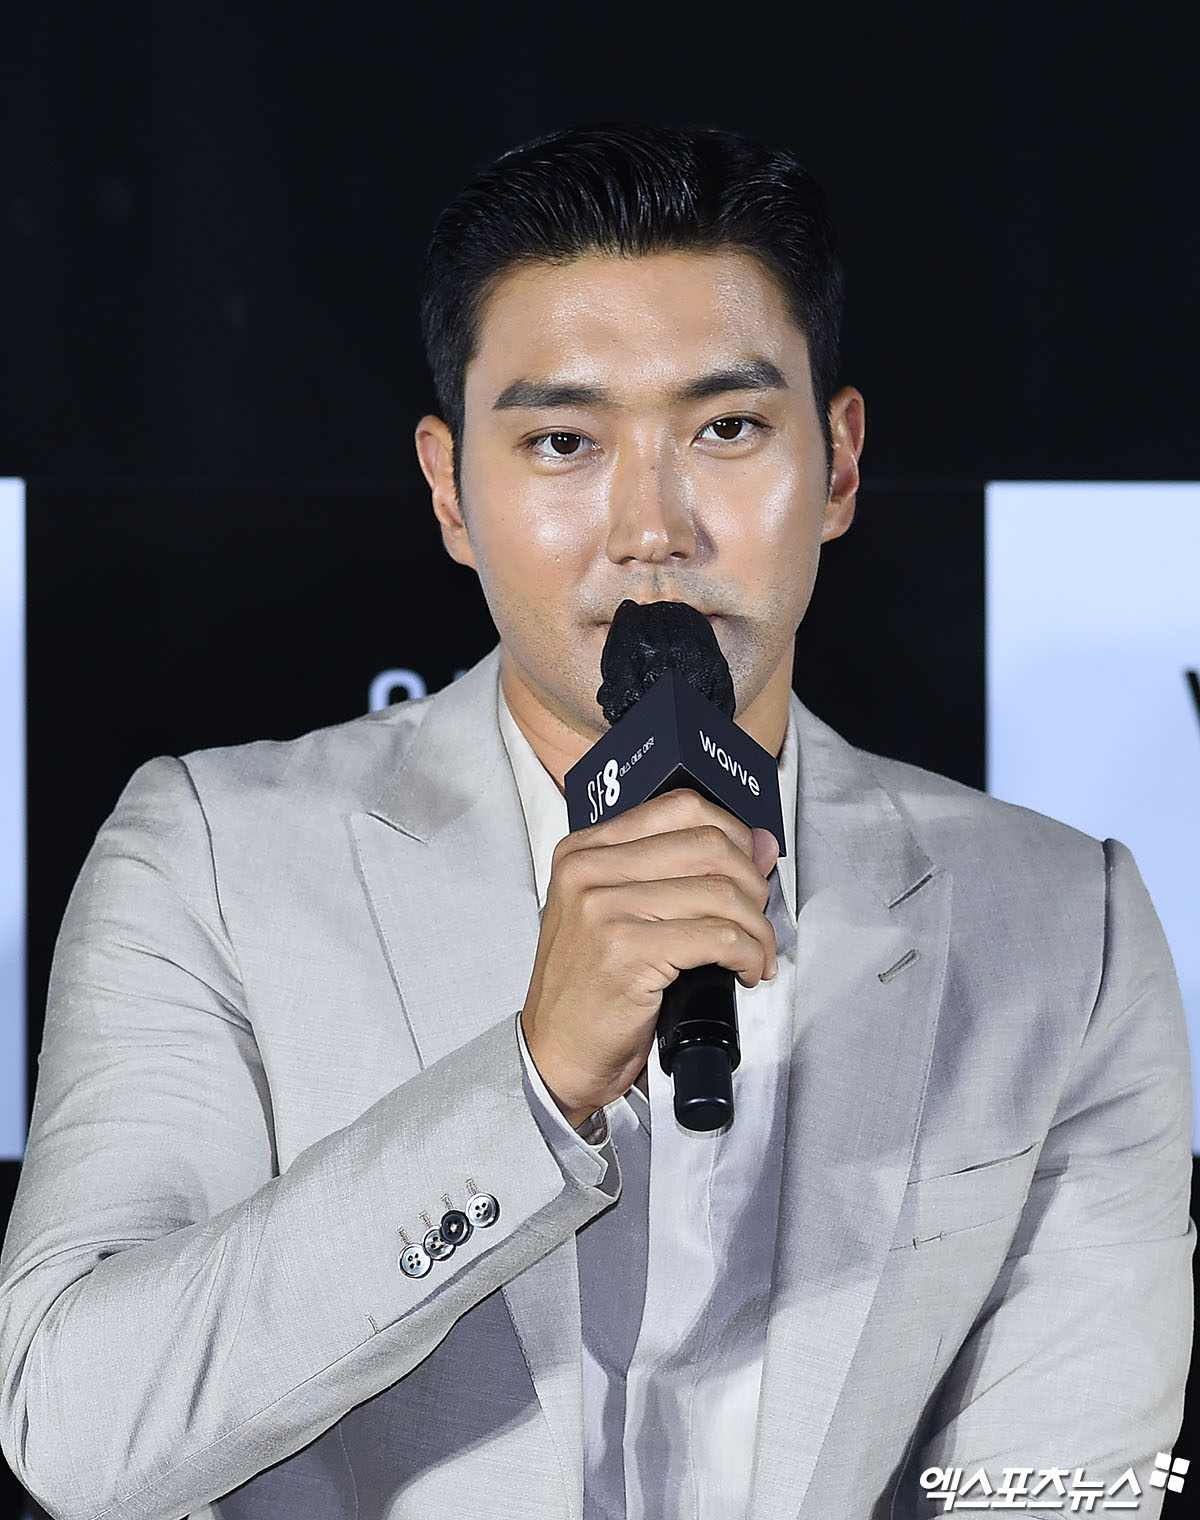 On the afternoon of the 8th, the production briefing session of the Korean Science Fiction SF 8 Project was held at CGV Yongsan Ipark Mall in Seoul Yongsan District.Actor Choi Siwon, who attended the production briefing session, greets him.SF8 (SF 8) is directed by a total of eight directors, including Min Kyu-dong, Nodeok, Hangaram, Lee Yoon-jung, Kim Ui-seok, Ahn Kook-jin, Oh Ki-hwan and Jang Cheol-soo, who belong to the Korea Film Directors Association (DGK), who are in the near future artificial intelligence (AI), augmented reality (AR), virtual reality (VR), robot, game, fantasy, horror, superpower It is a crossover project of movies and dramas completed by dealing with various materials such as disasters.